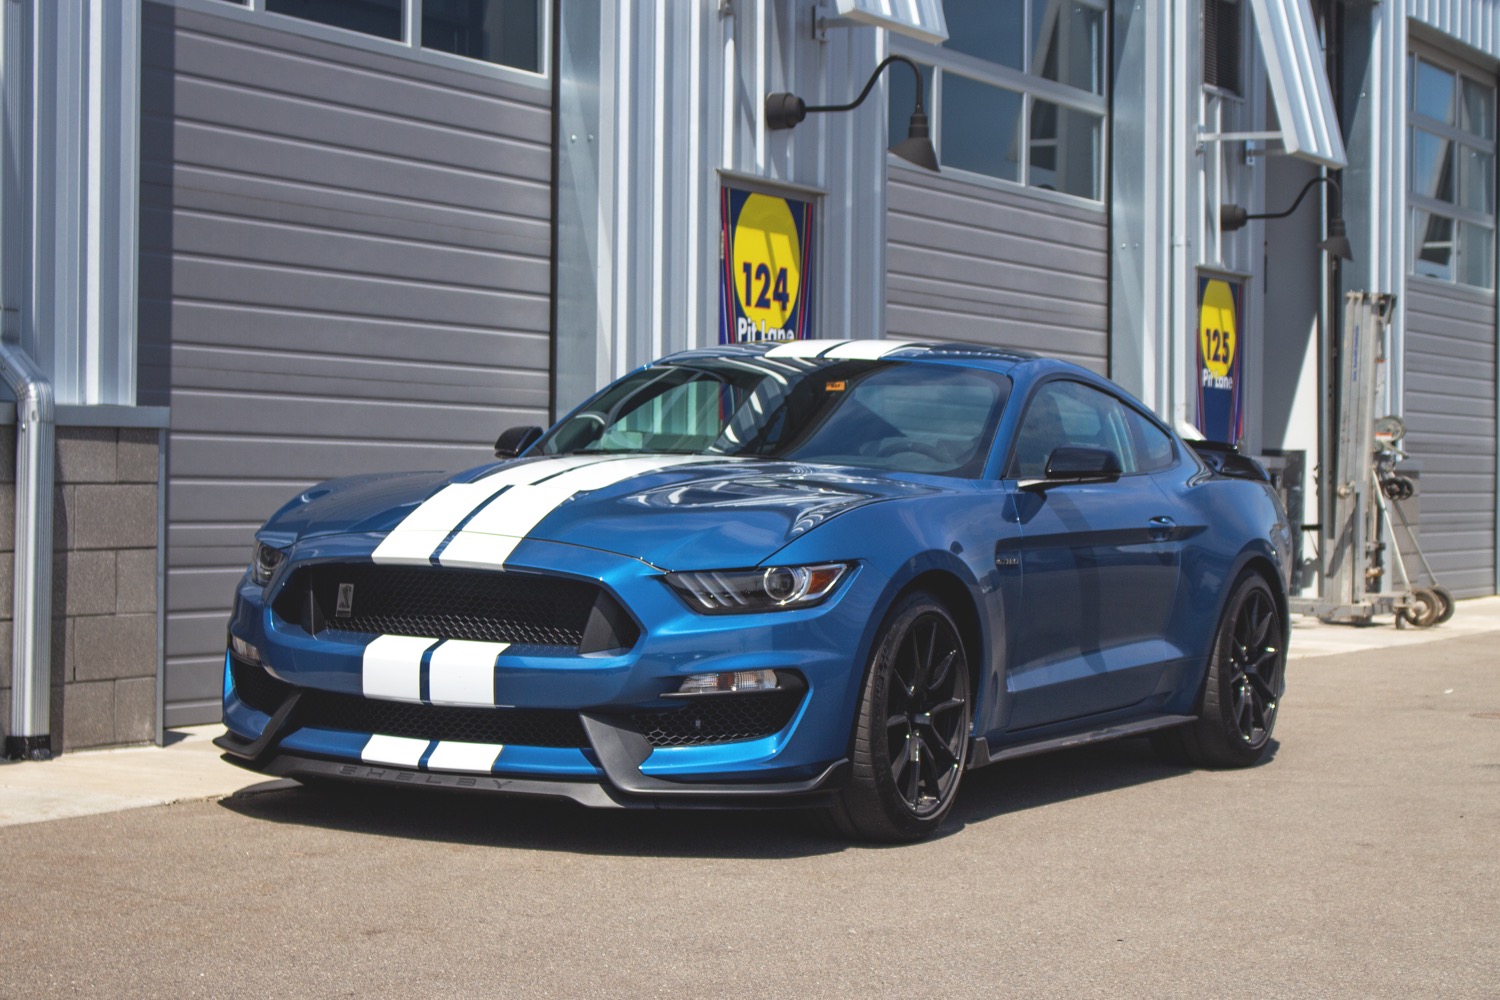 The New Shelby GT350 Gurney Flap Explained